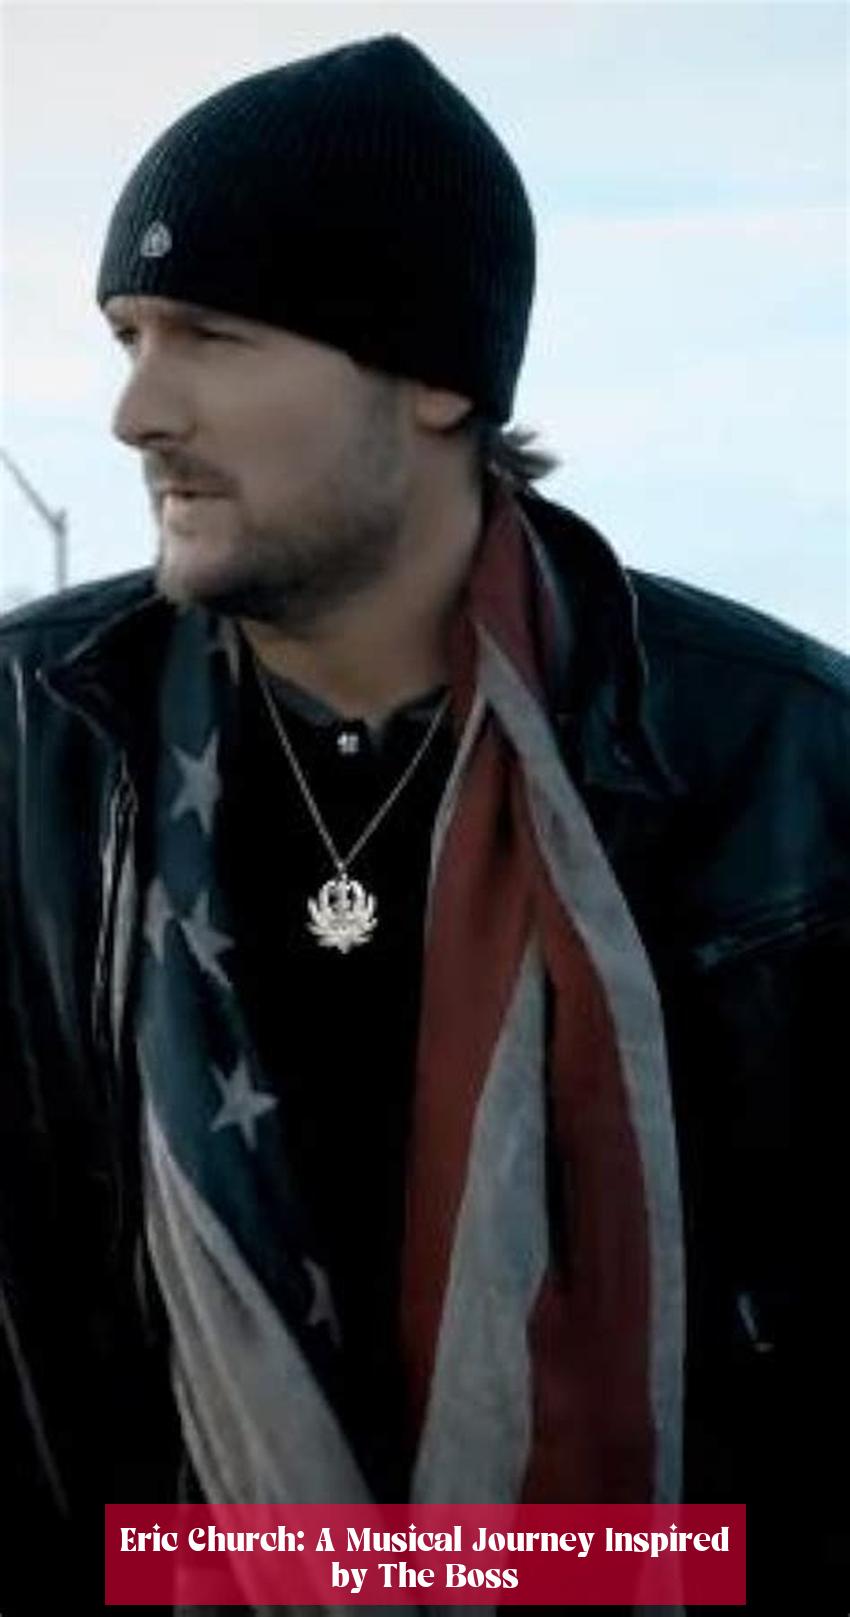 Eric Church: A Musical Journey Inspired by The Boss